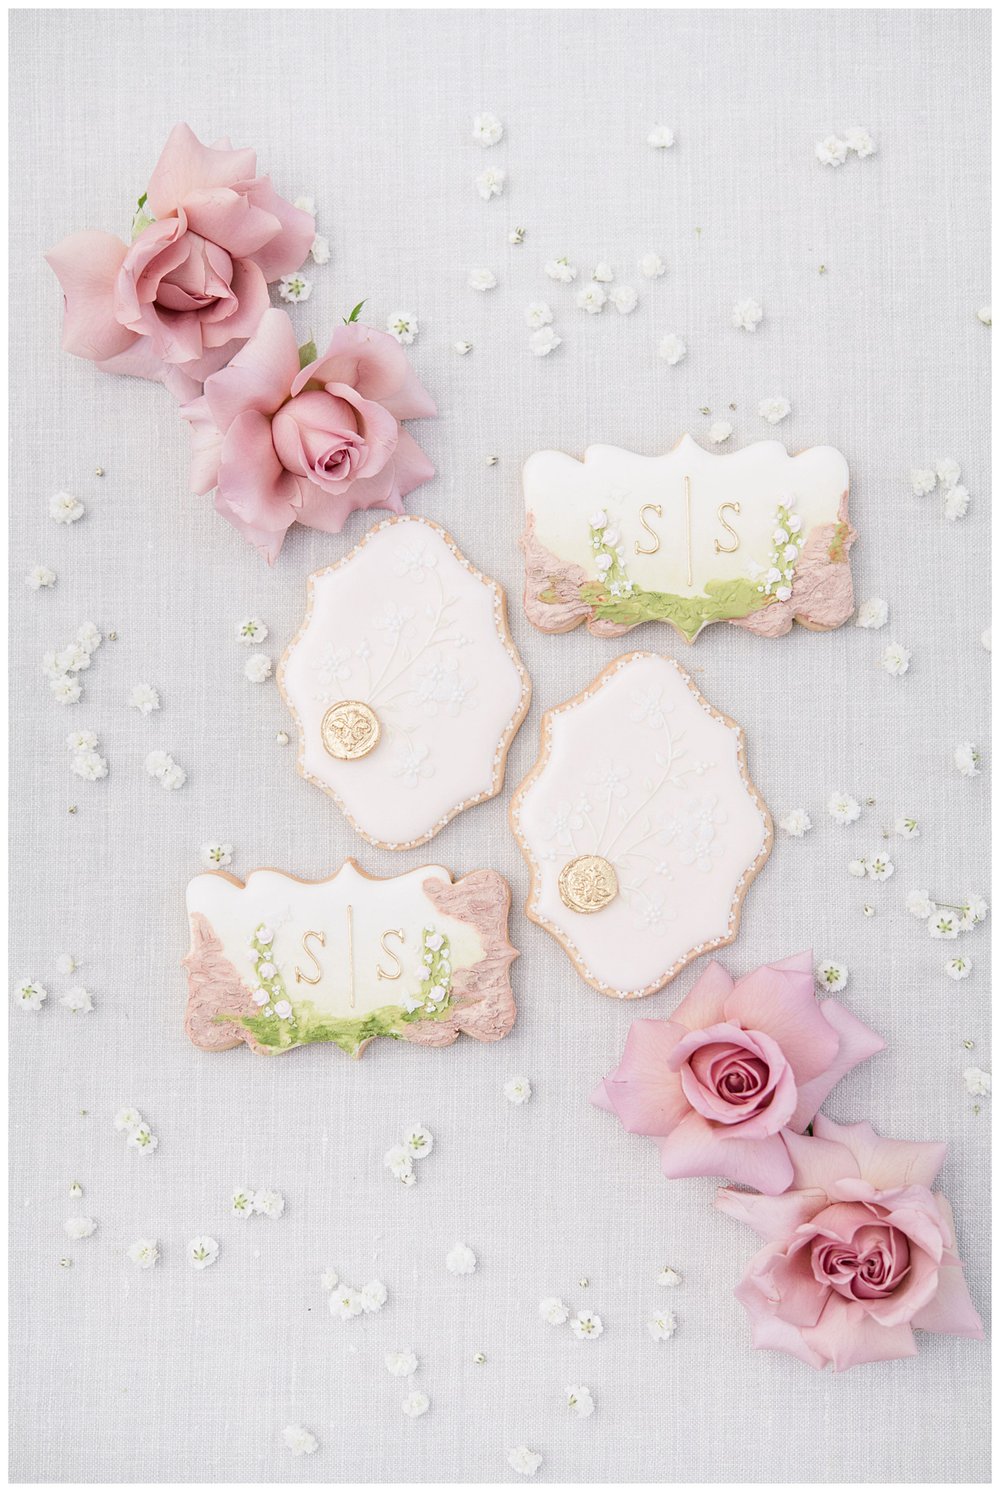 blush and white wedding cookies surrounded by blush florals